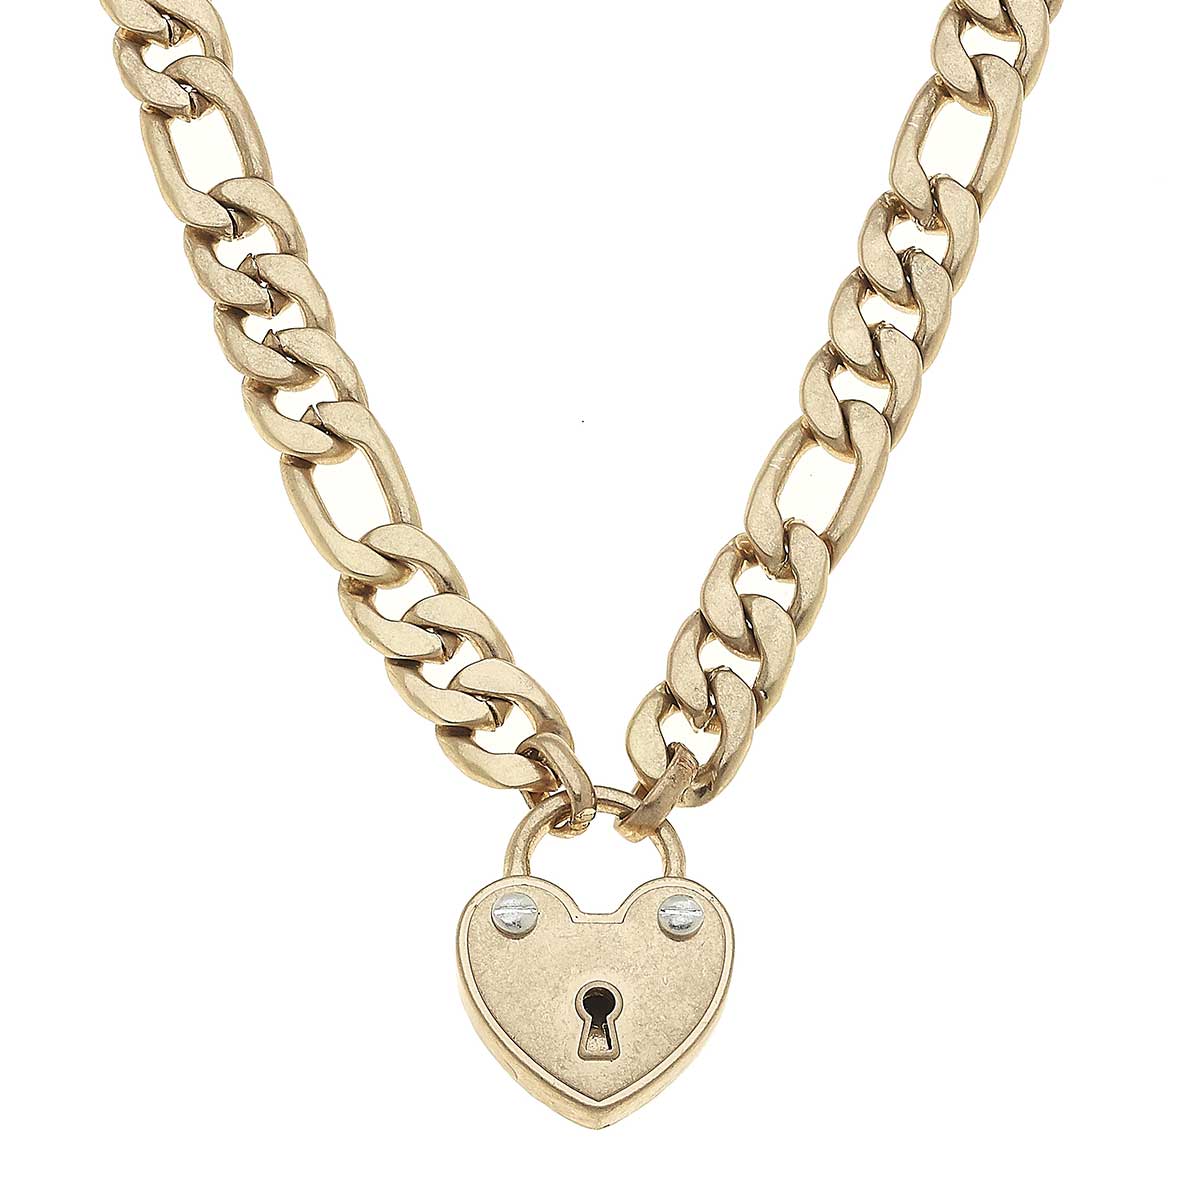 Whitney Padlock Chain Necklace in Worn Gold